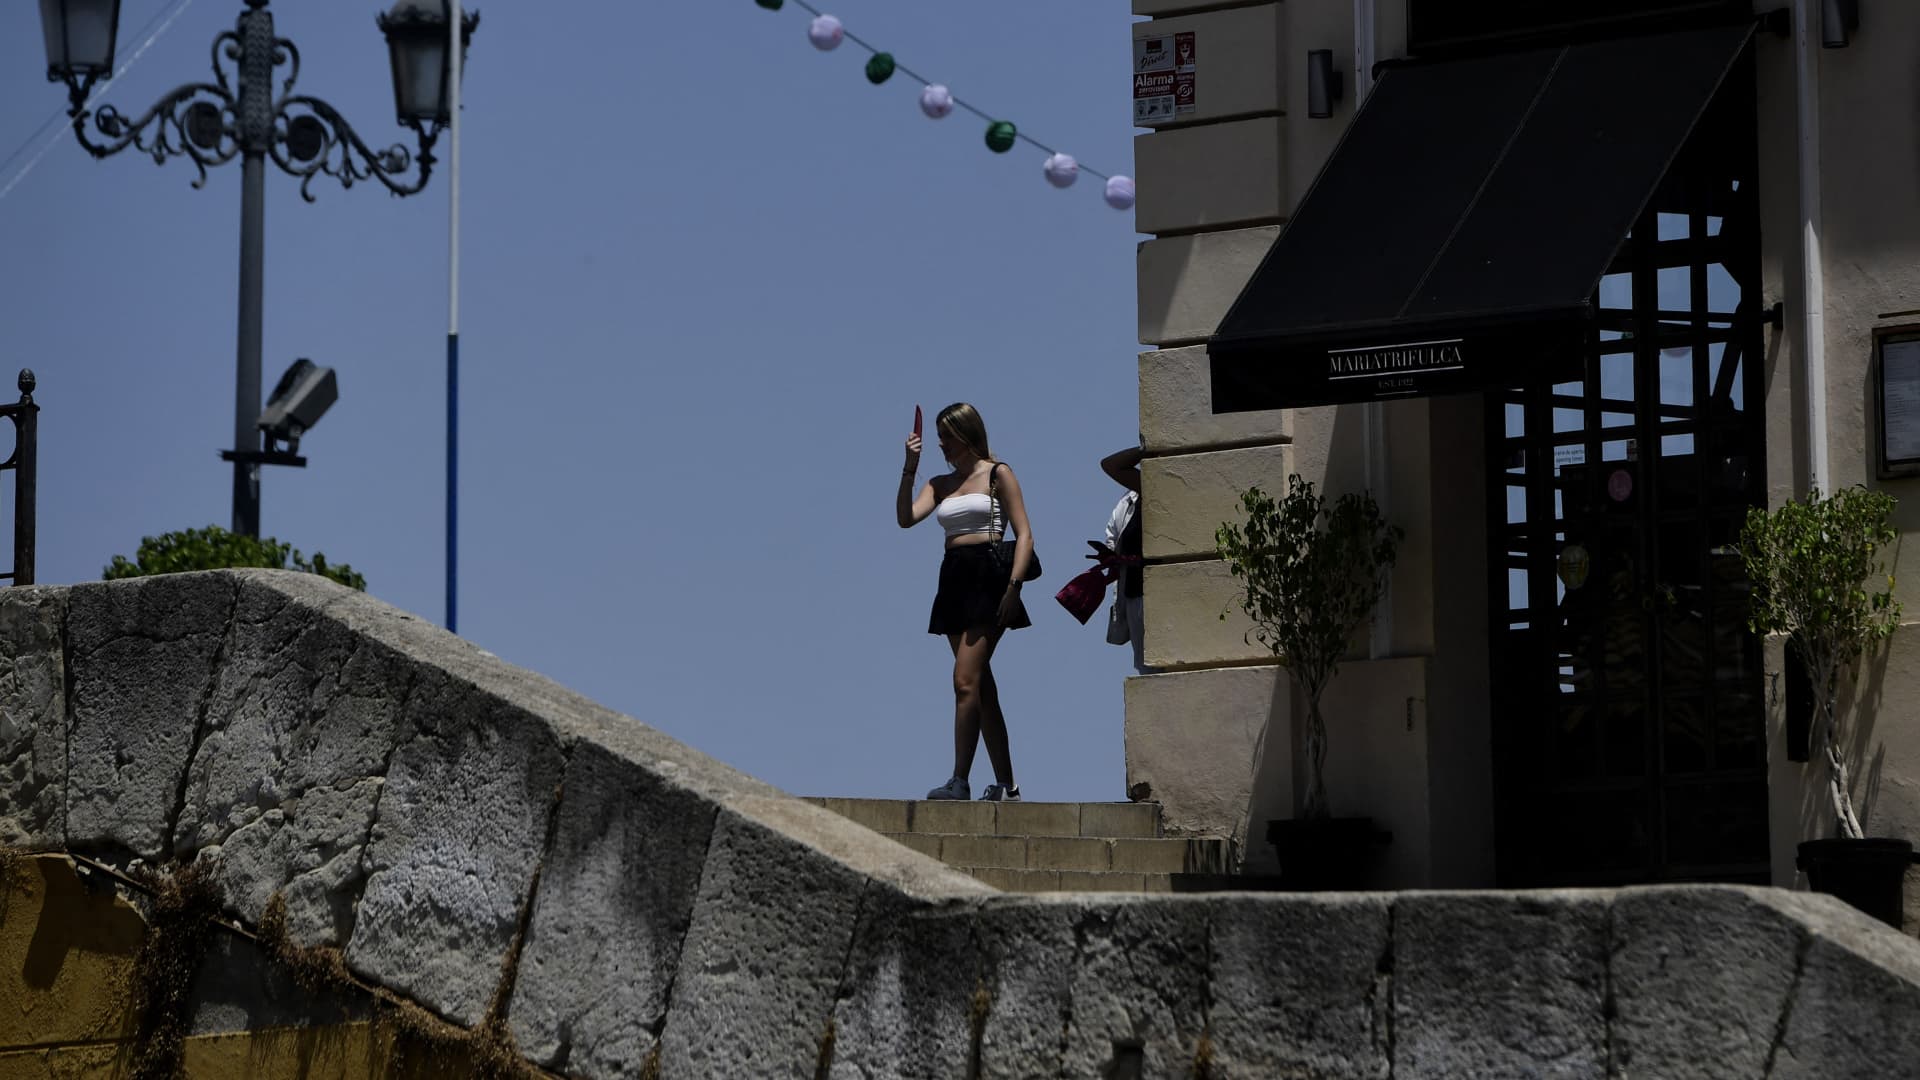 'The heat is relentless': Scorching temperatures bring misery to daily life in Spain